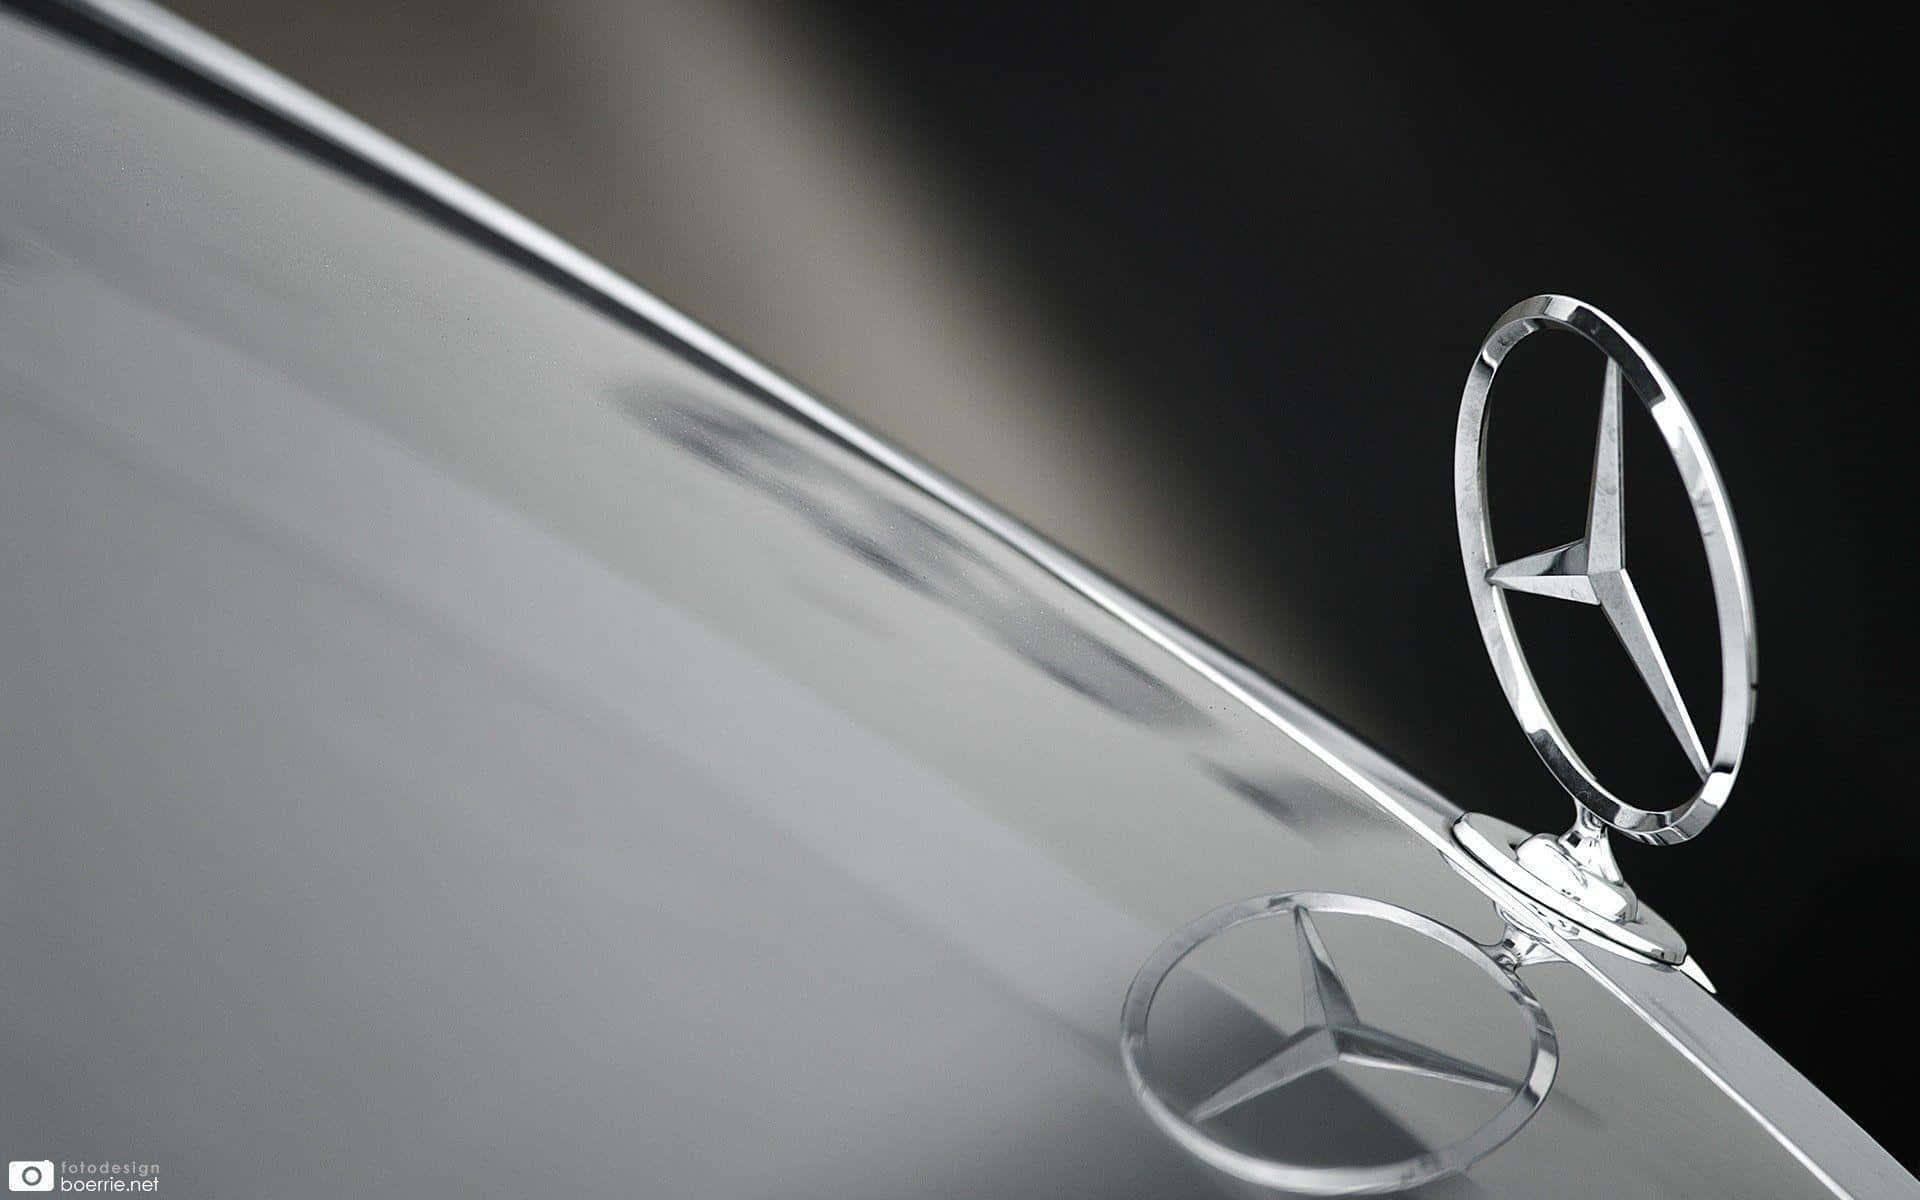 The Mercedes Benz Logo – Precision With Style